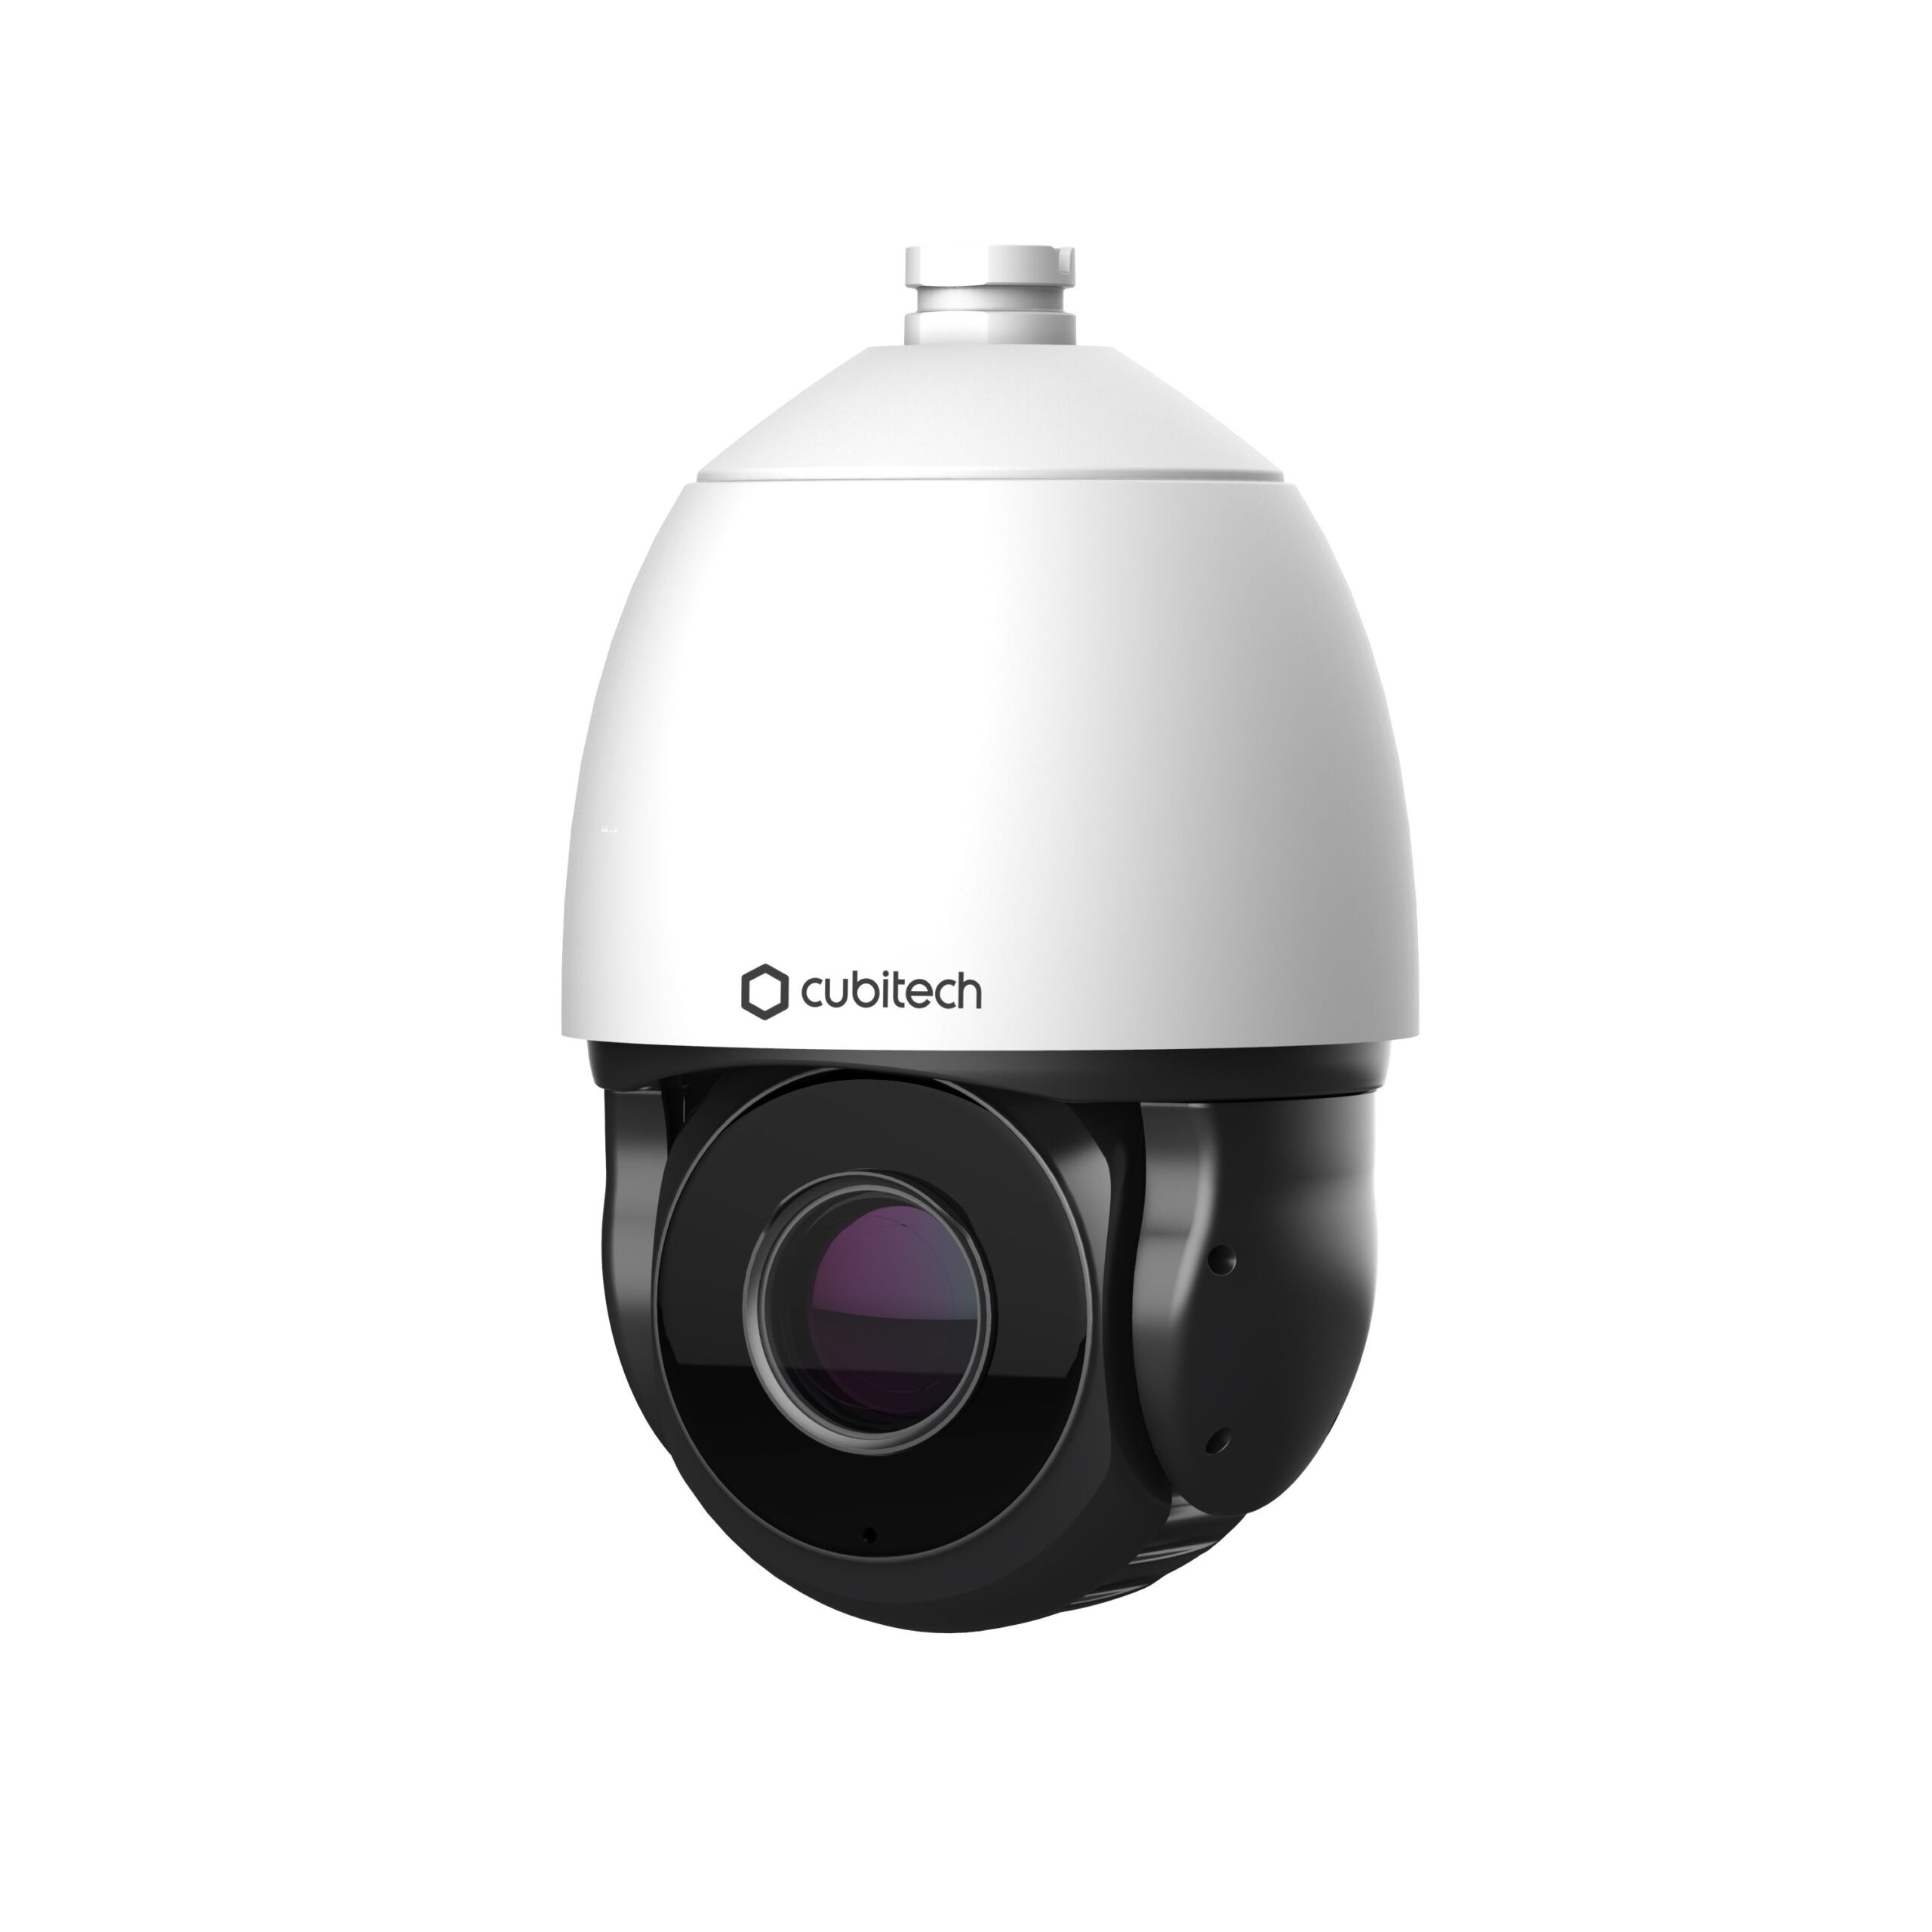 CB-PI2030XR 1080P, IR High Speed Dome with 30X Optical Zoom & 400 Presets